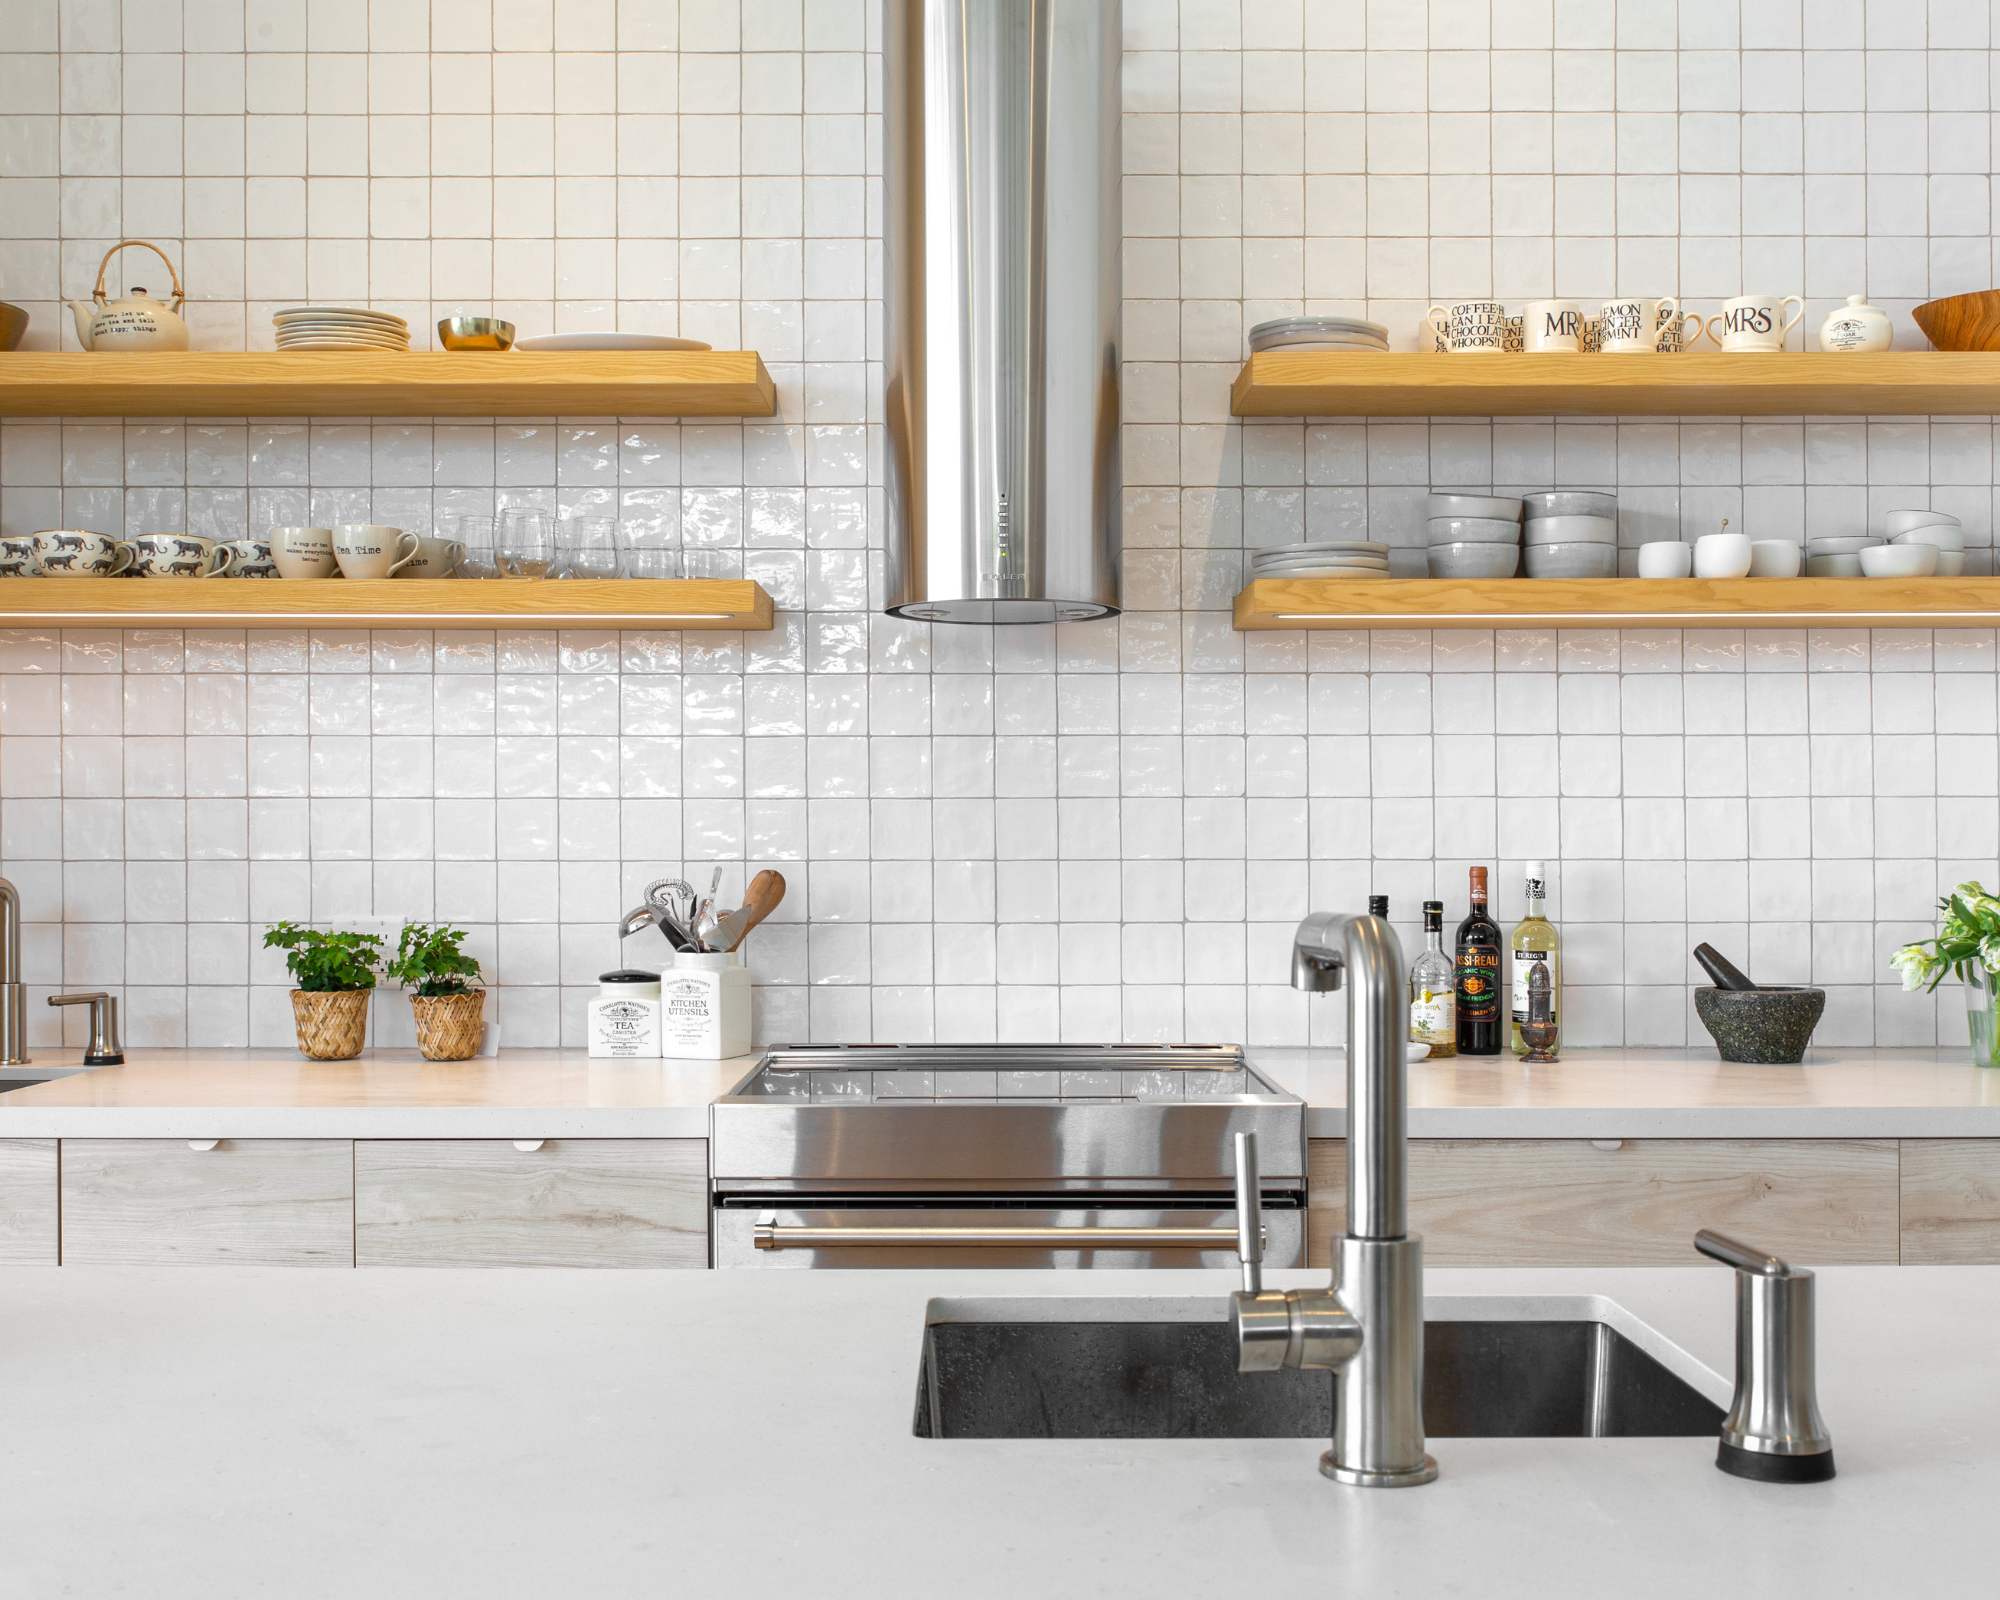 White tile Scandinavian kitchen design with light wood open shelving, and island with chrome faucet and curated finish